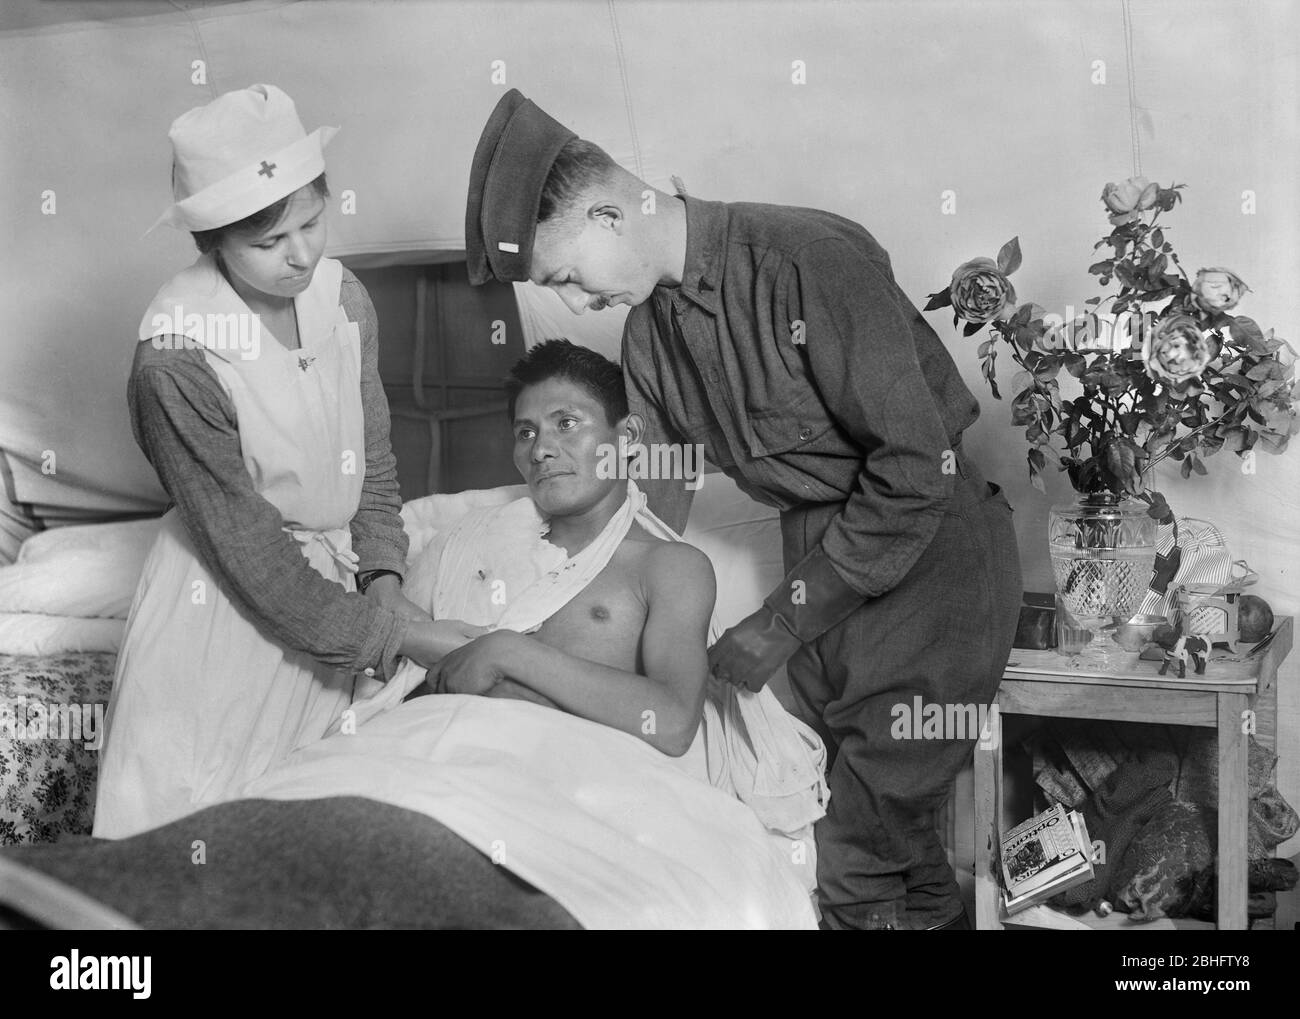 Wounded American Soldier, a Choctaw Native American from Oklahoma, being tended to by Surgeon and Nurse at American Military Hospital No. 5, a Tent Hospital supported by American Red Cross, Auteuil, France, Lewis Wickes Hine, American National Red Cross Photograph Collection, September 1918 Stock Photo